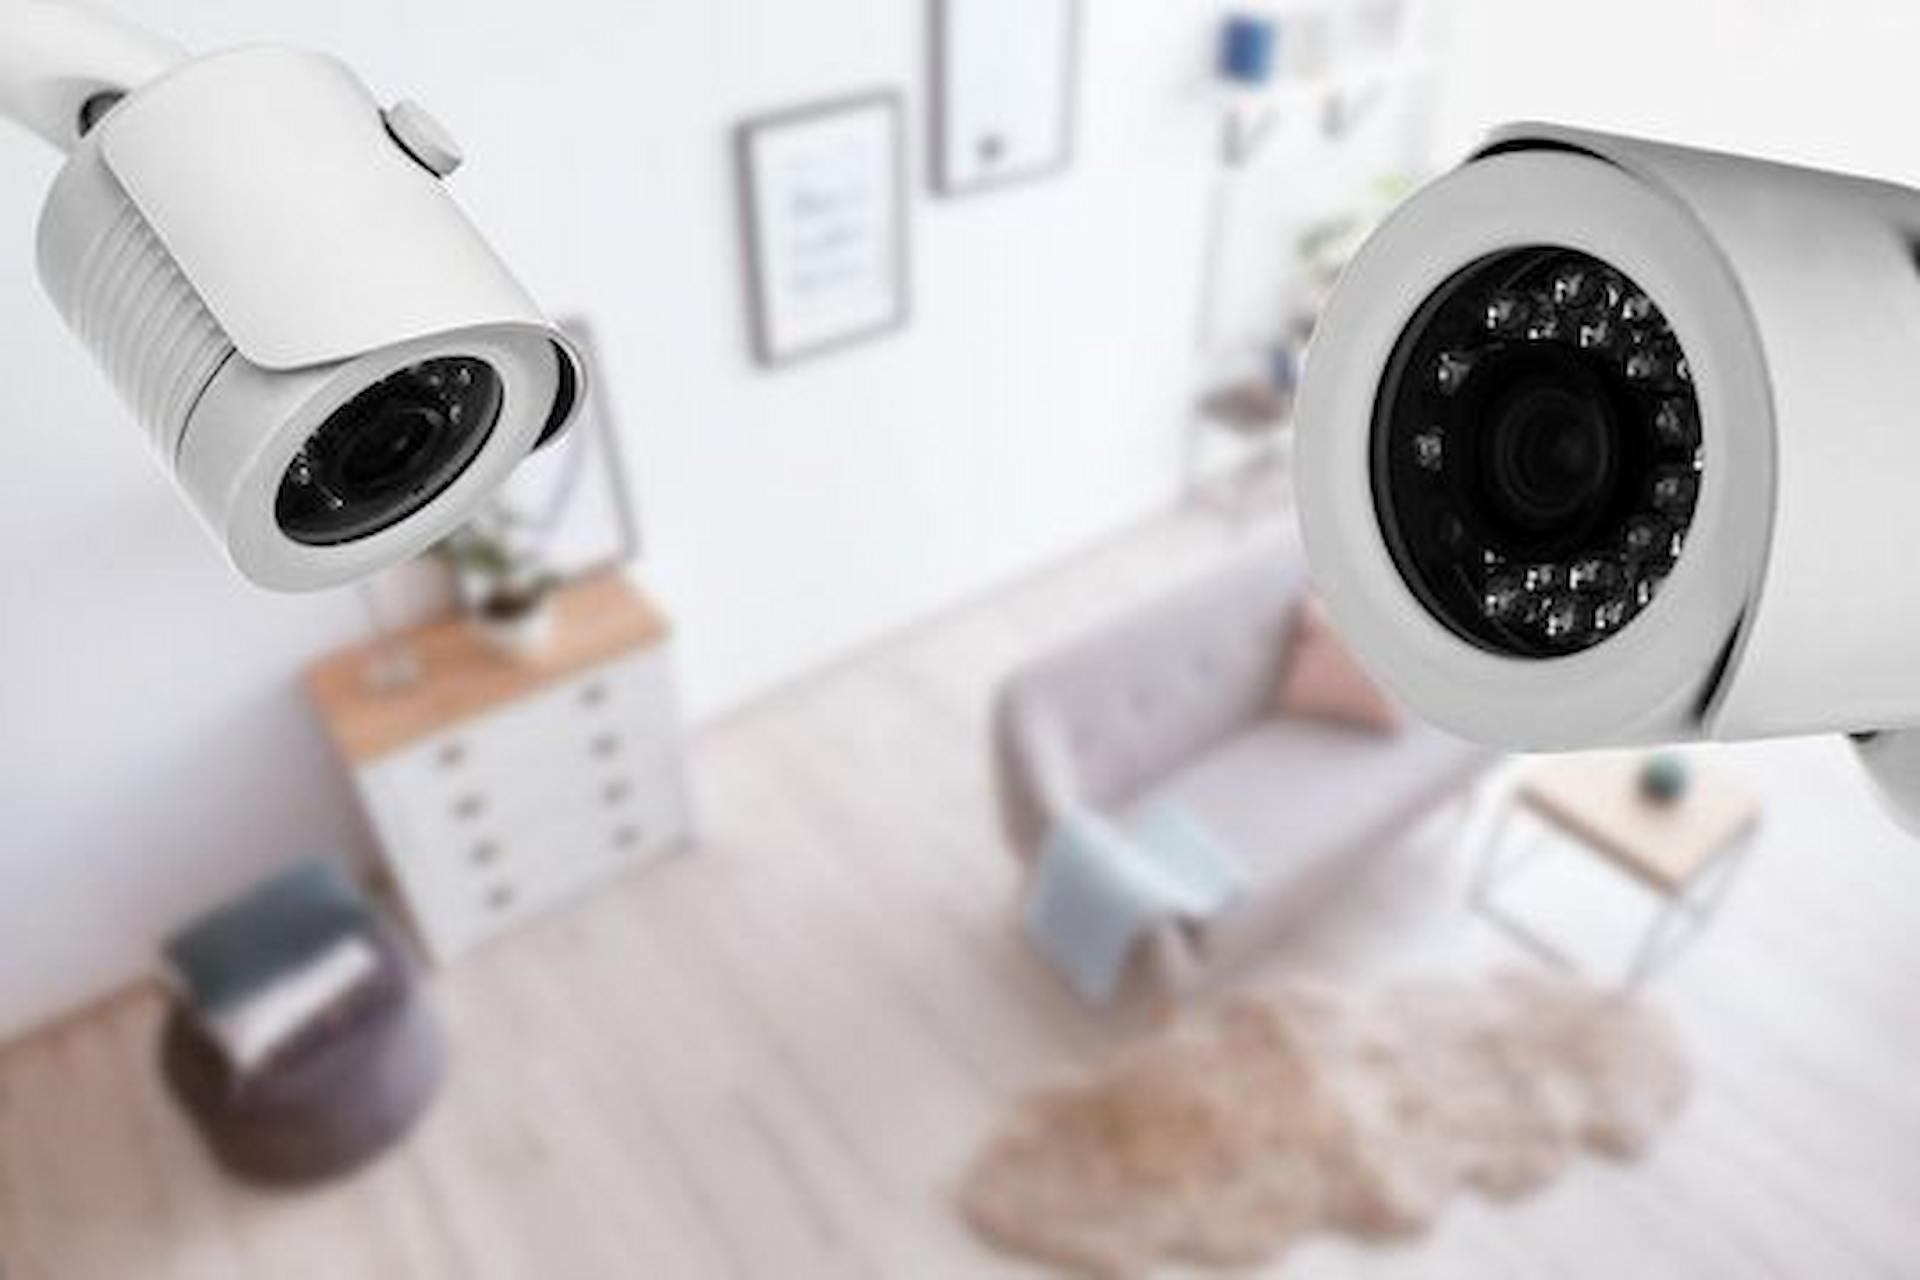 What Is The Significance Of CCTV Companies These Days?